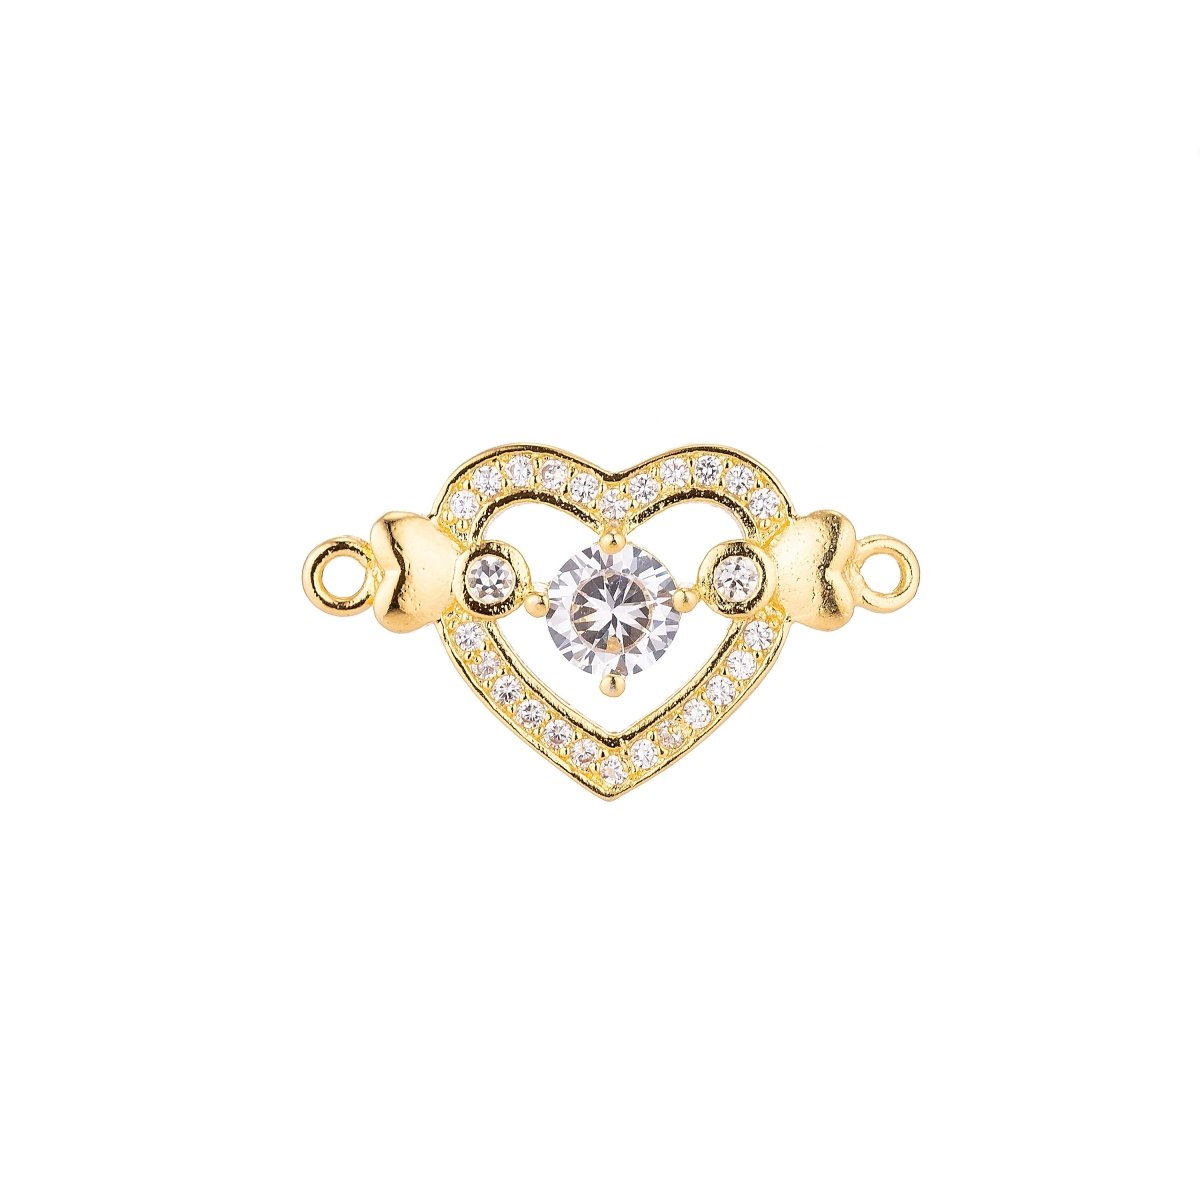 18K Gold Filled Lovely Elegant Heart With Crystal Cubic Zirconia Bracelet Charm Bead Finding Connector For Jewelry Making F-031 - DLUXCA